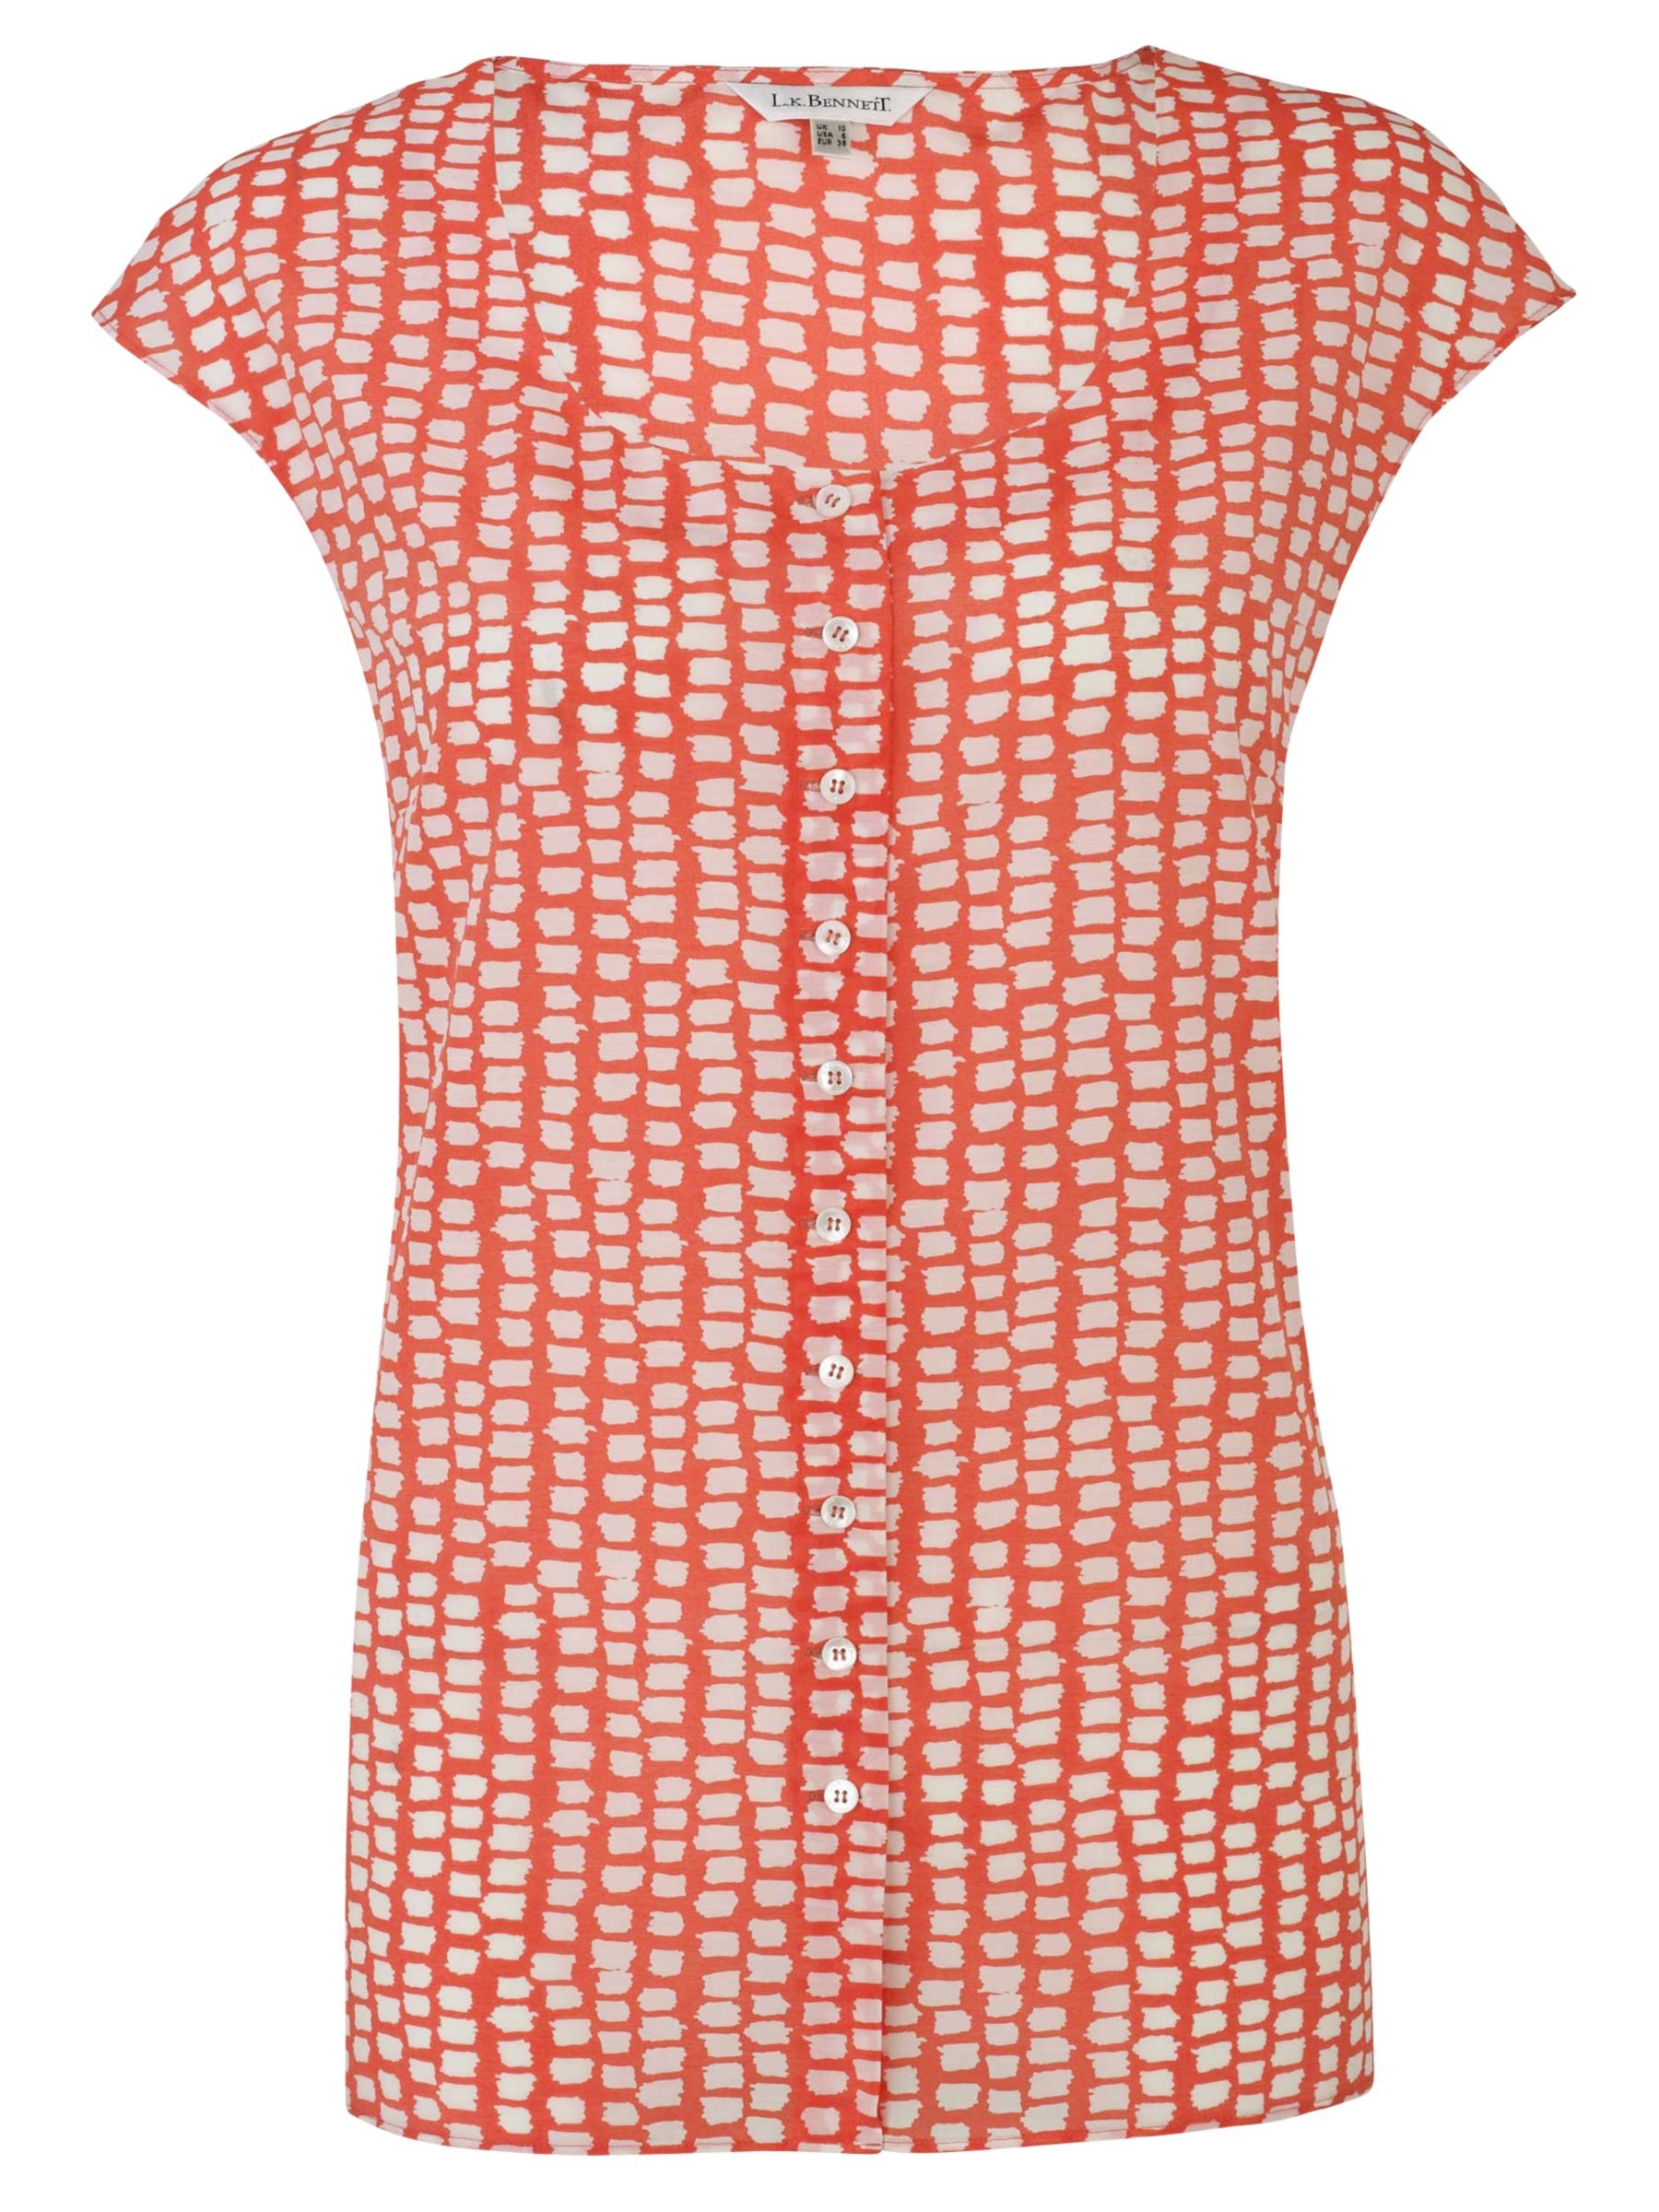 L.K. Bennett Lucy Blouse, Coral